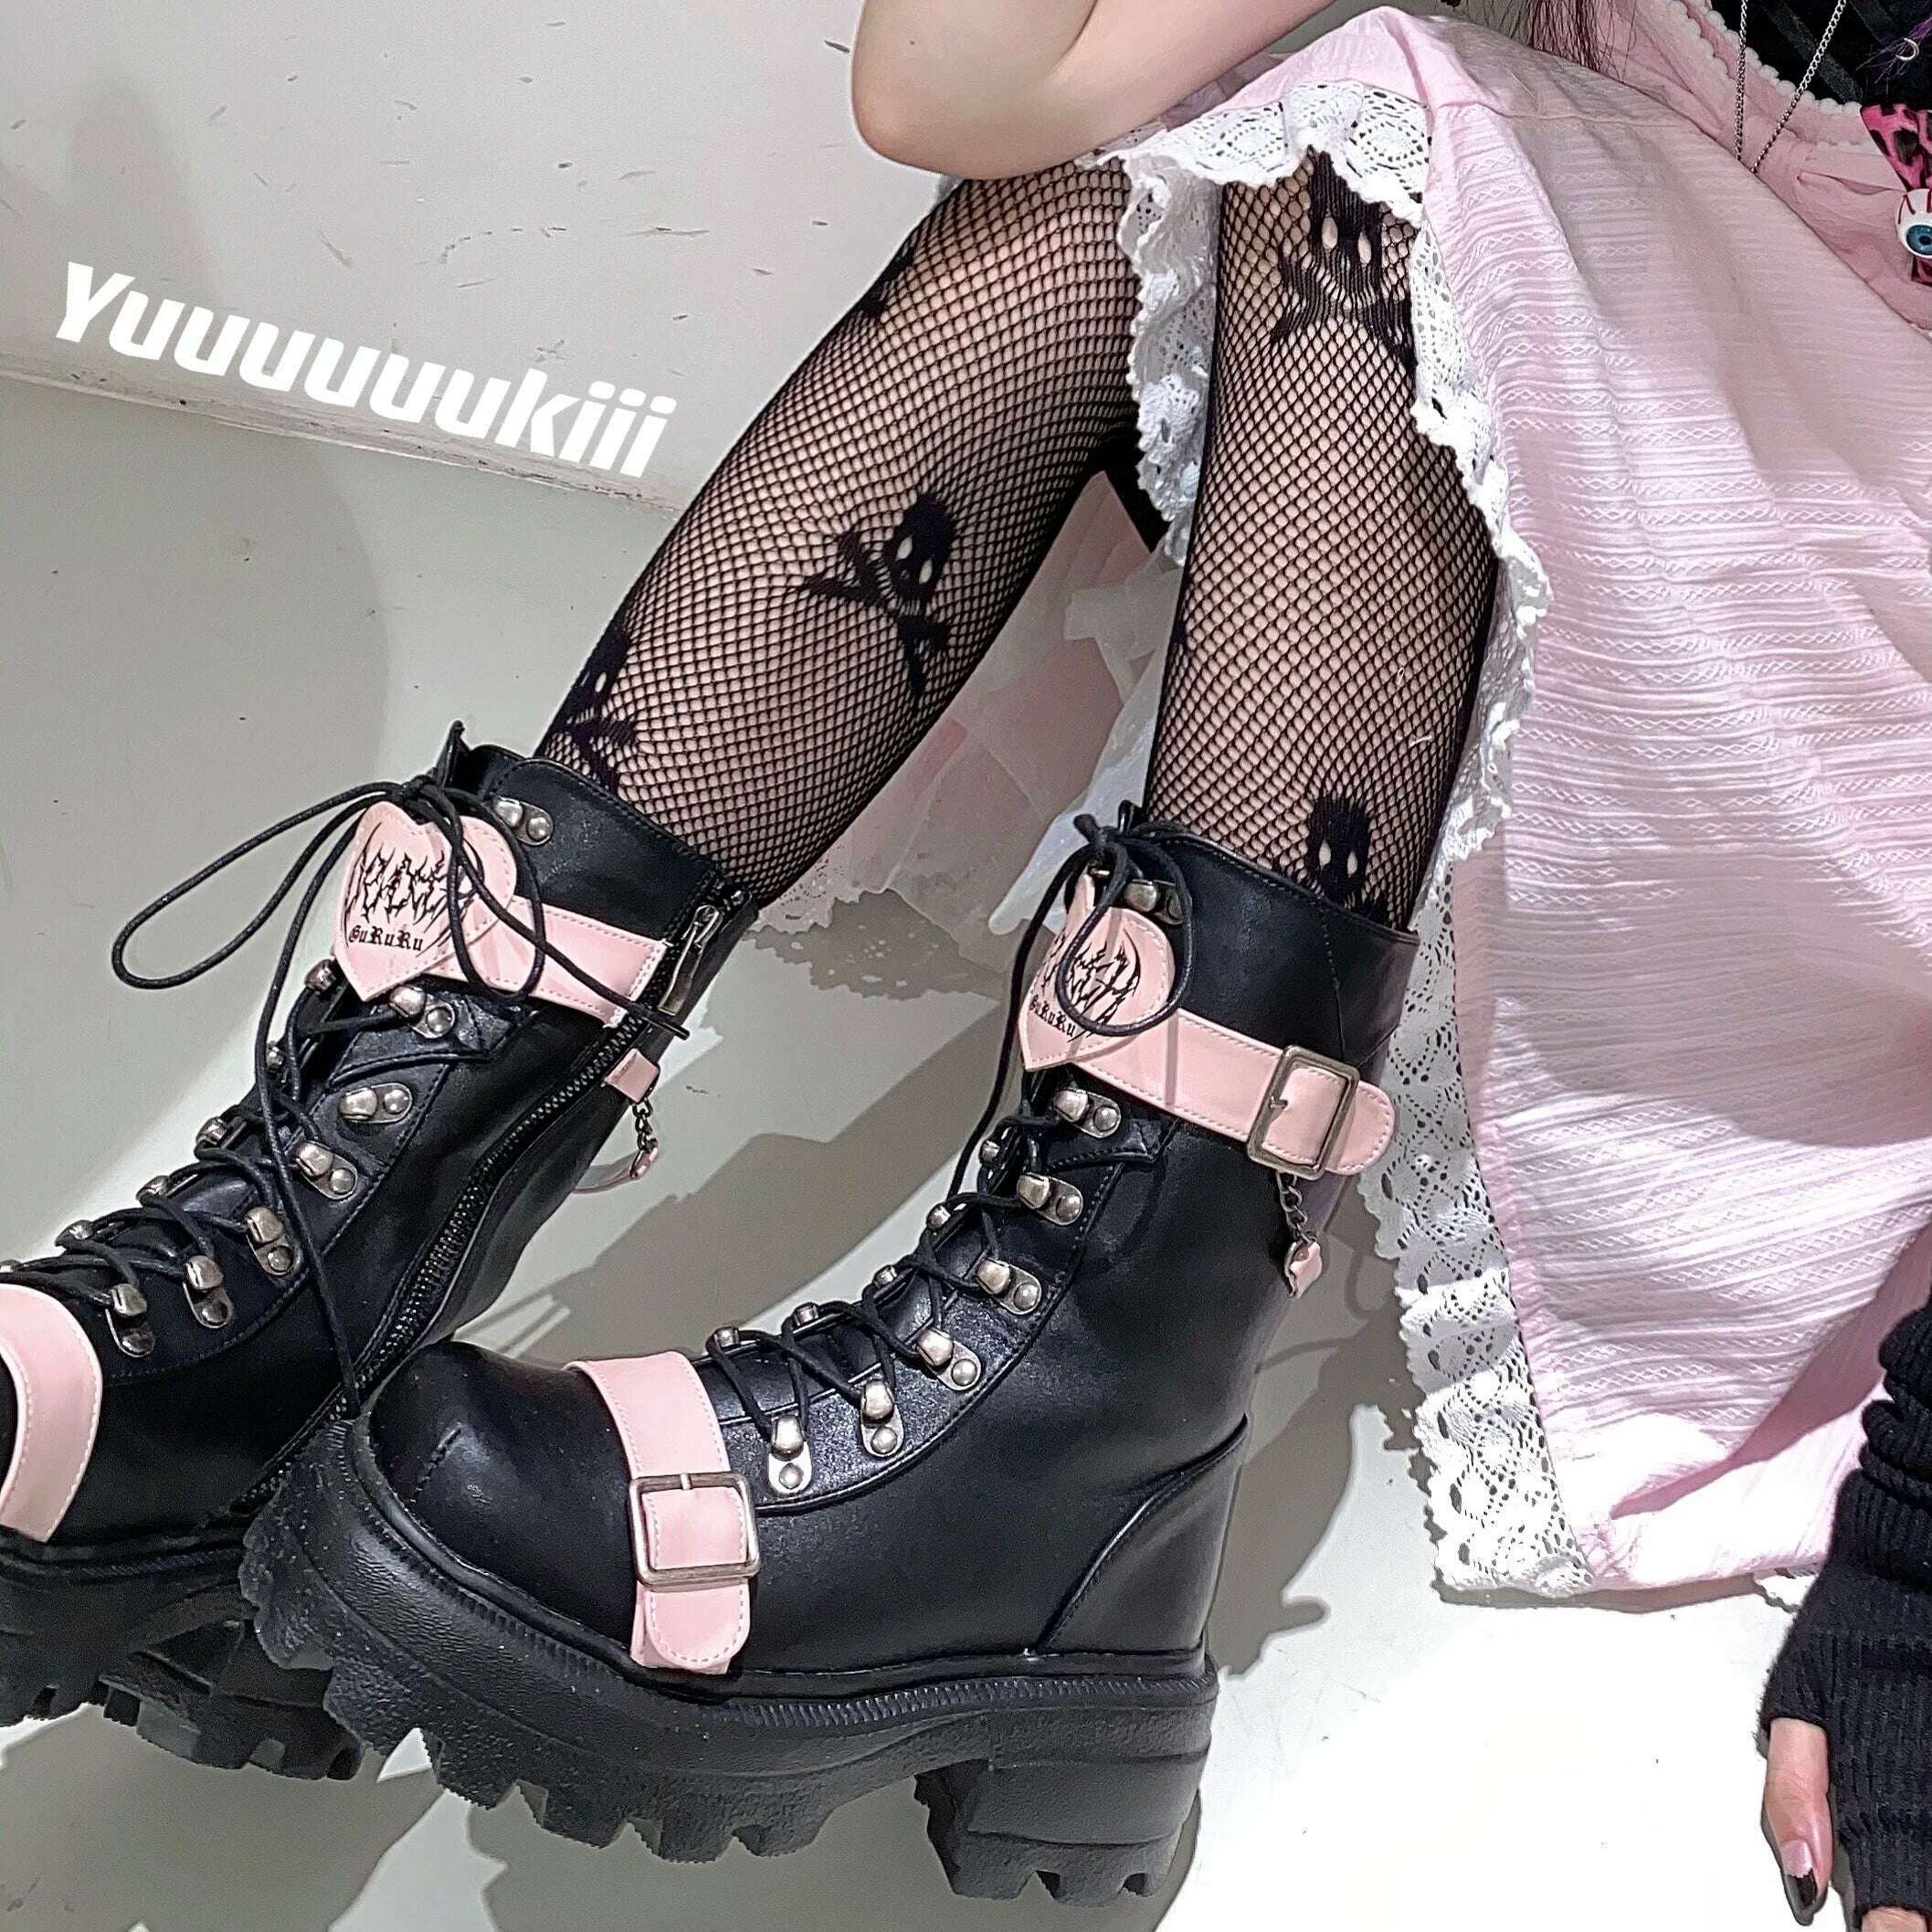 KIMLUD, COYOUNG Japanese Women Punk Rock Halloween Dark Buckle Gothic Thick Bottom Martin Boots Cosplay Lolita PU Leather Shoes, C / 35, KIMLUD Women's Clothes